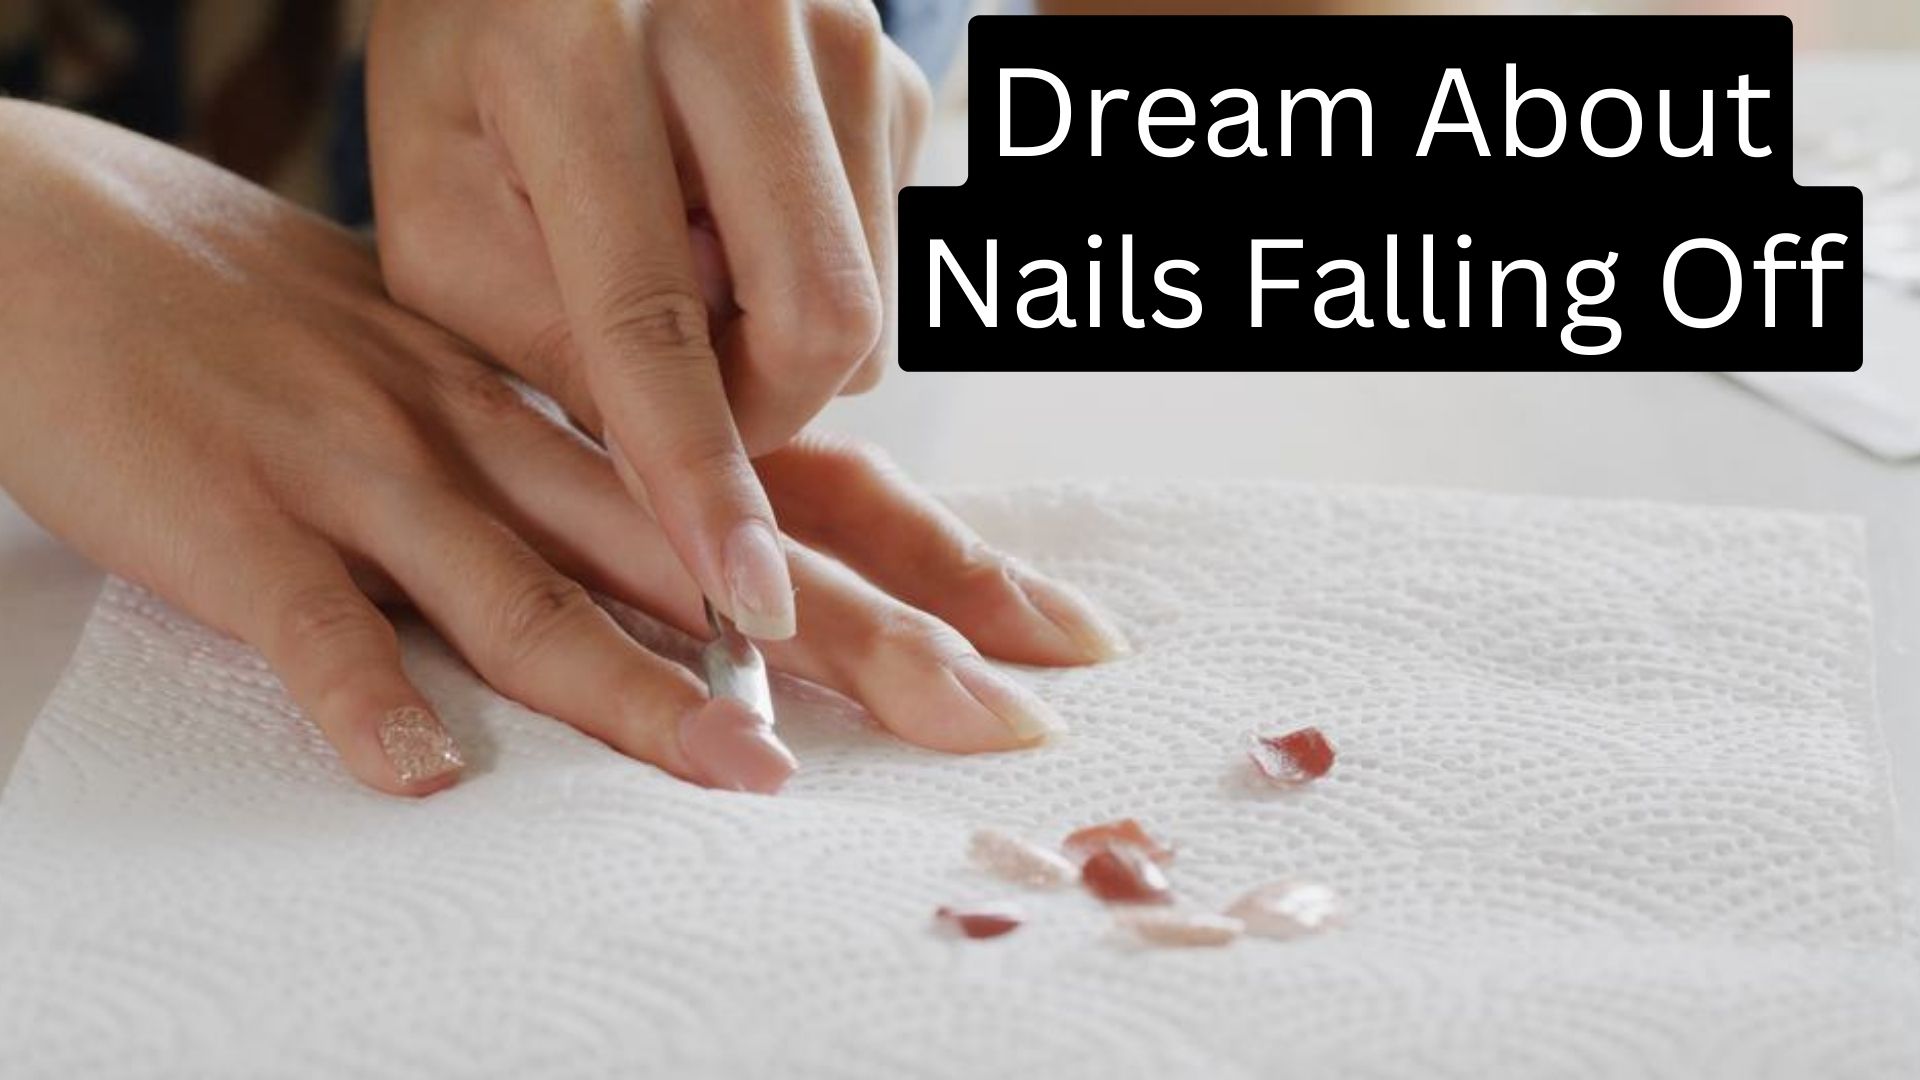 Dream About Nails Falling Off - The Lack Of Confidence In Your Abilities